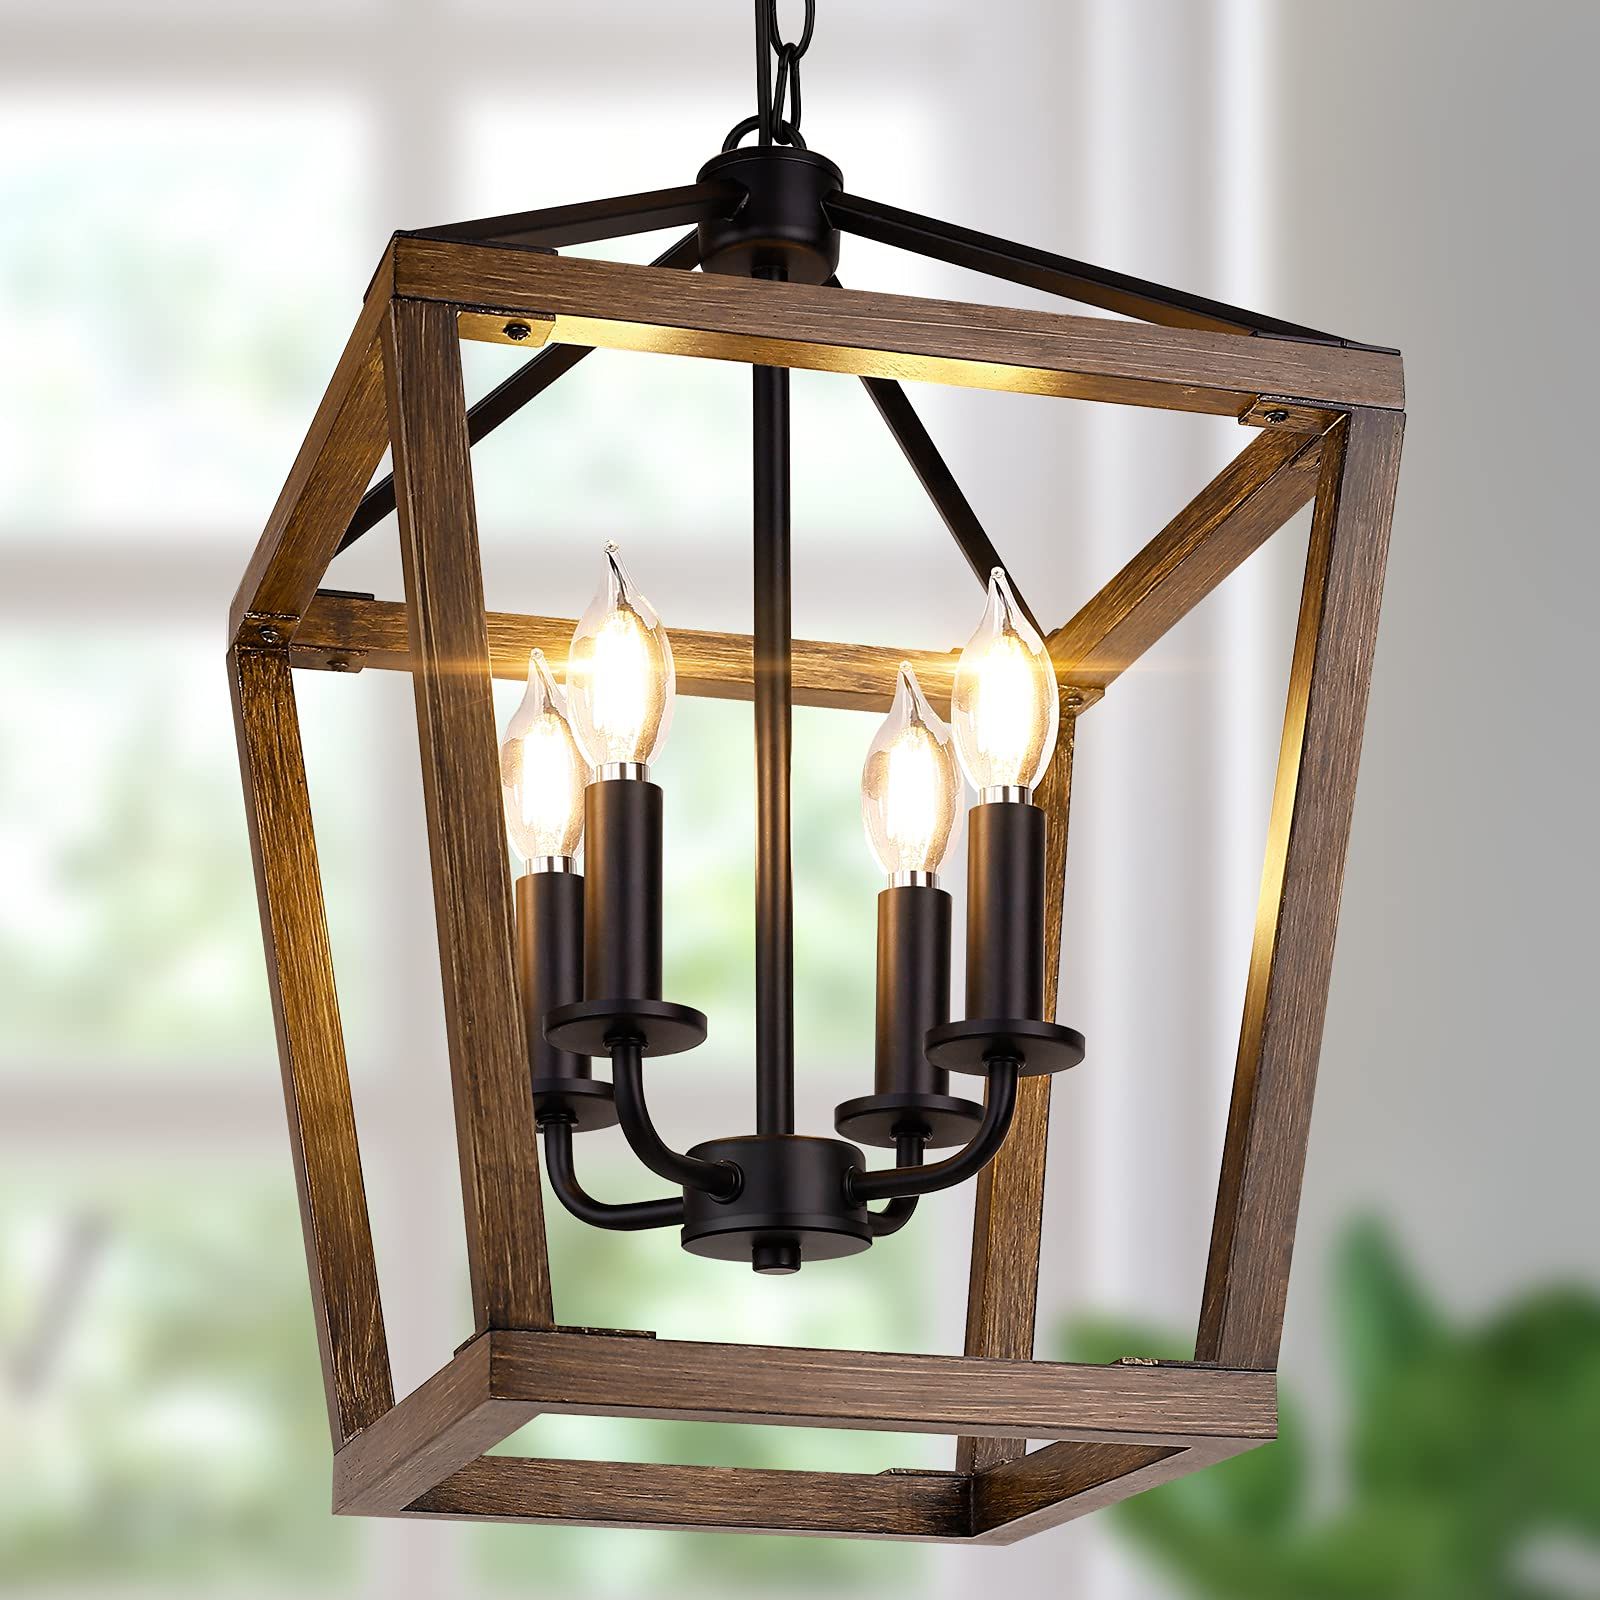 Most Popular Farmhouse Chandelier Light Fixture For Kitchen Dining Room, 4 Light Rustic  Pendant Hanging Ceiling Light Height Adjustable In Oak Wood Finish, Cage Lantern  Lighting With E12 Base For Hallway Foyer – – Amazon With Regard To Weathered Oak Wood Lantern Chandeliers (View 3 of 15)